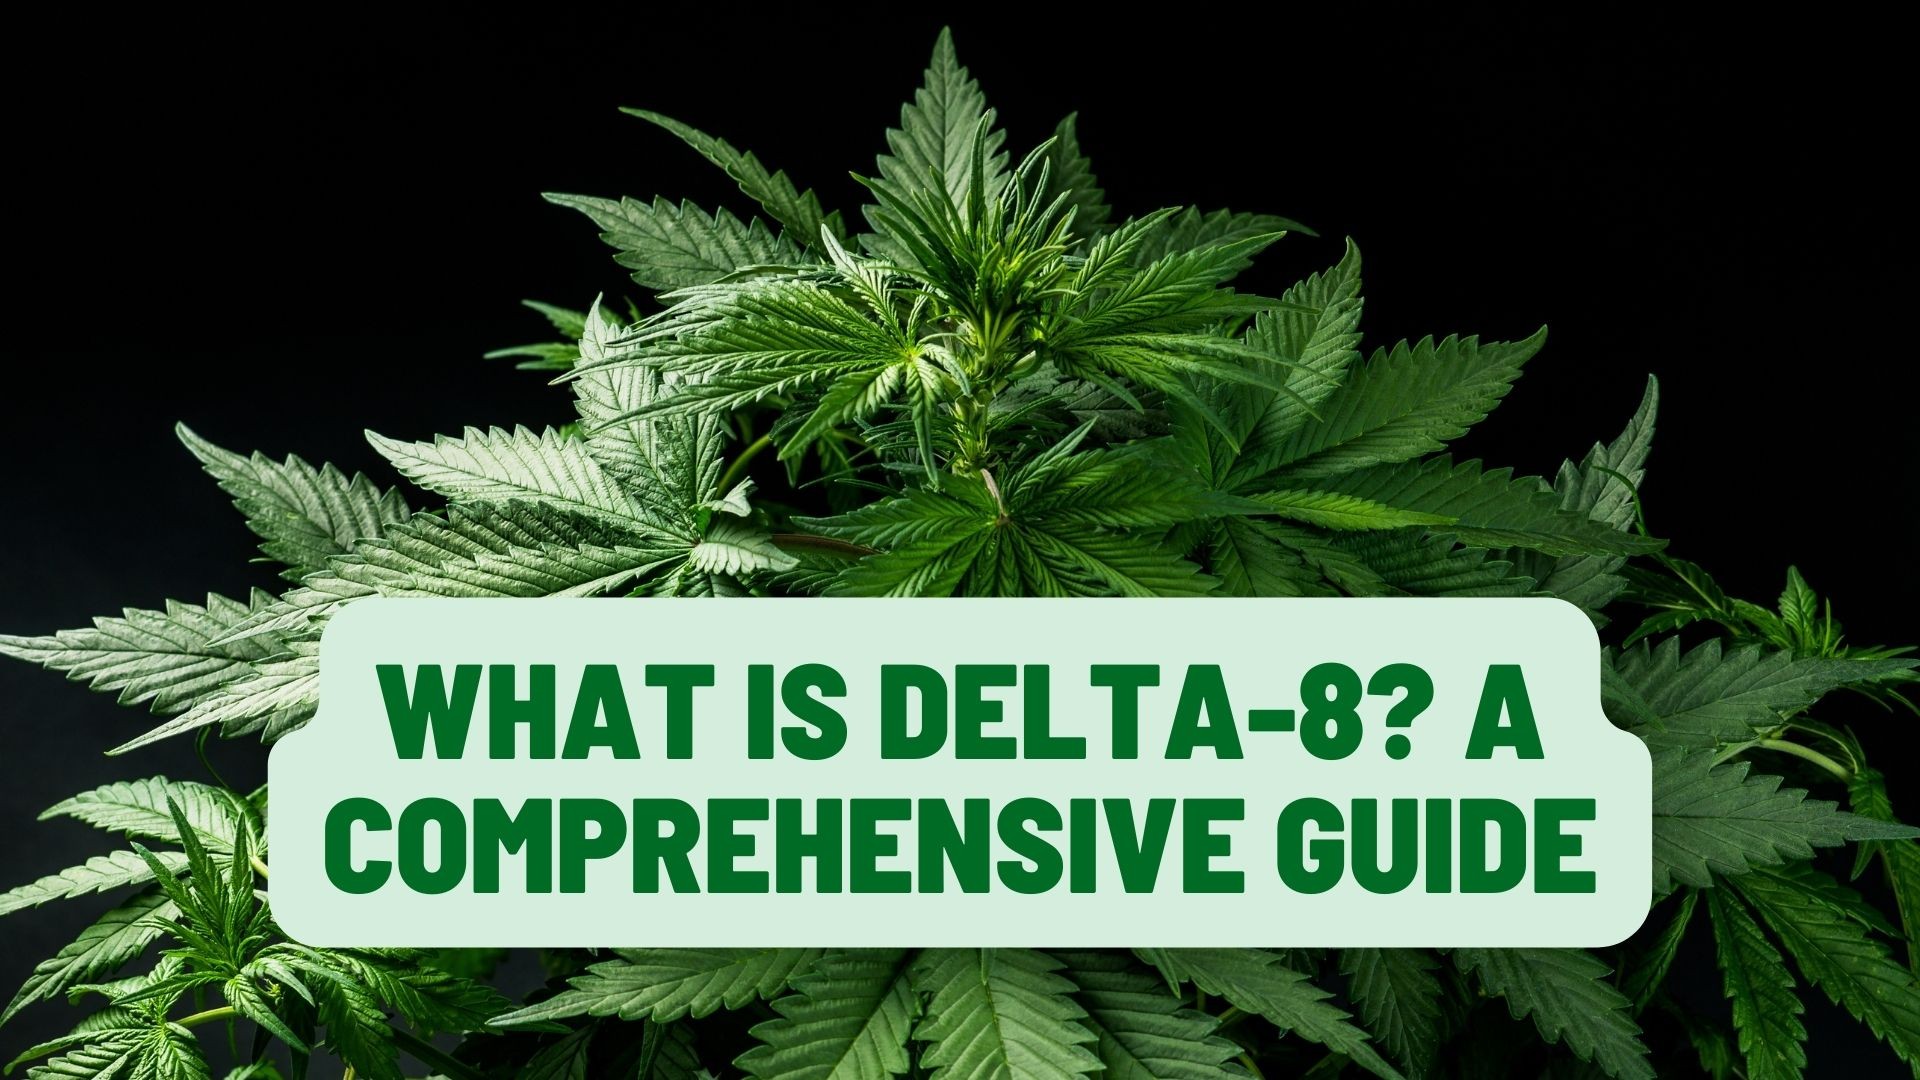 What is Delta-8? A Comprehensive Guide